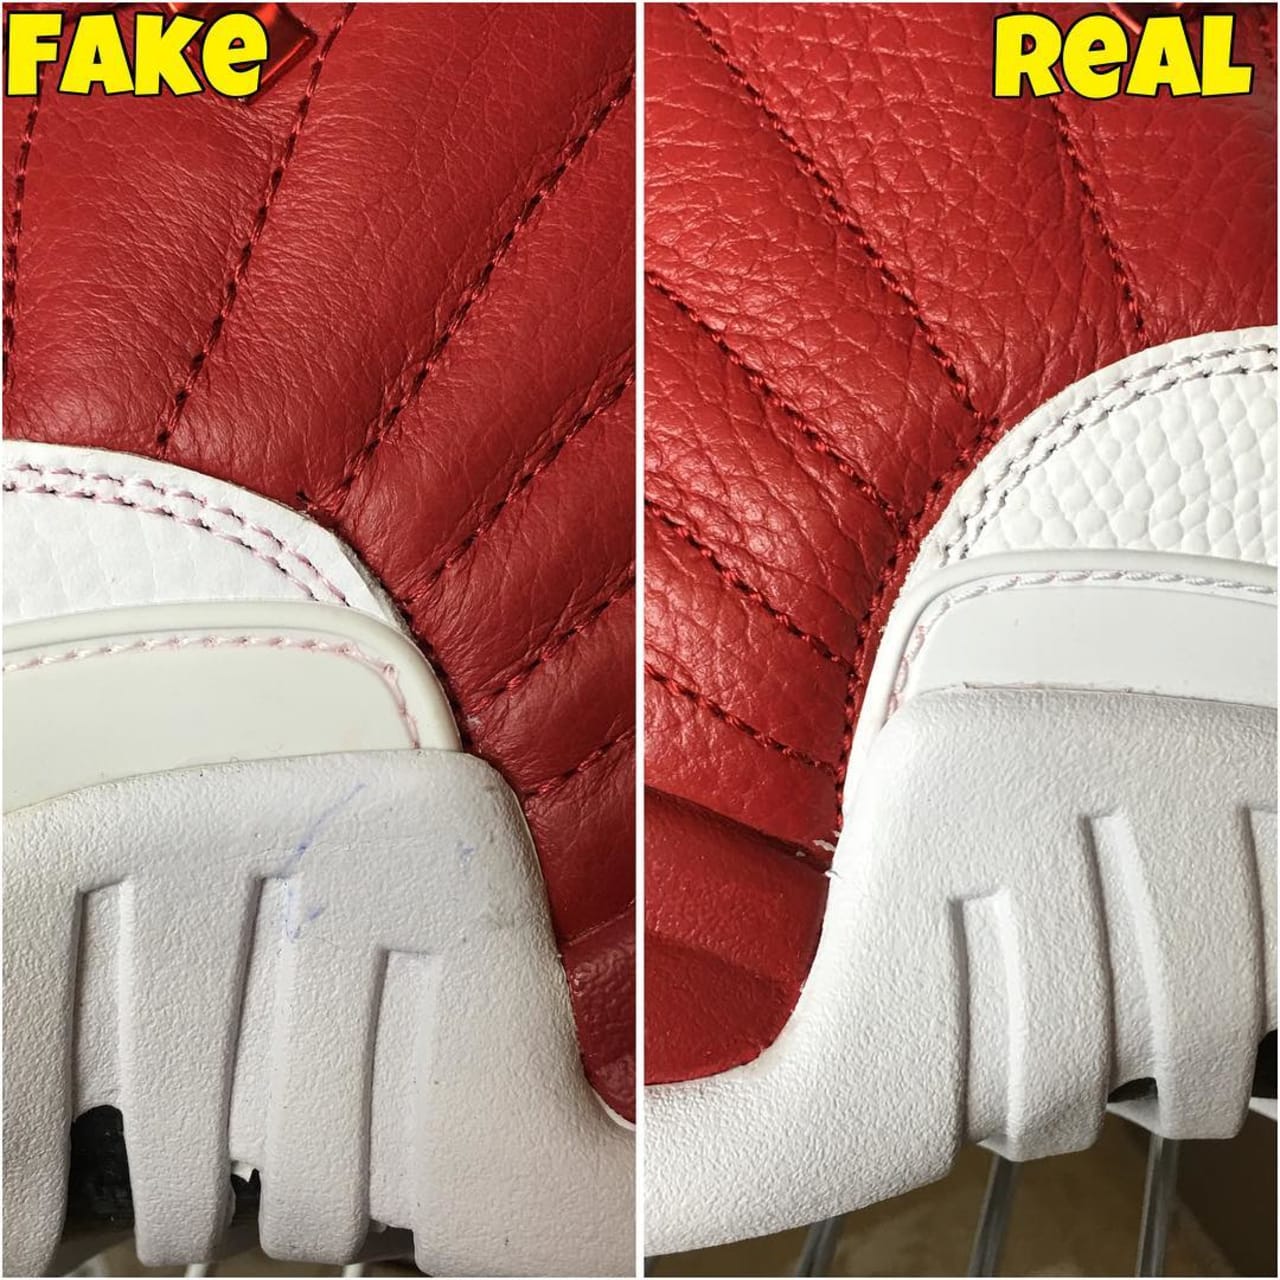 how to tell if jordan 12 are real